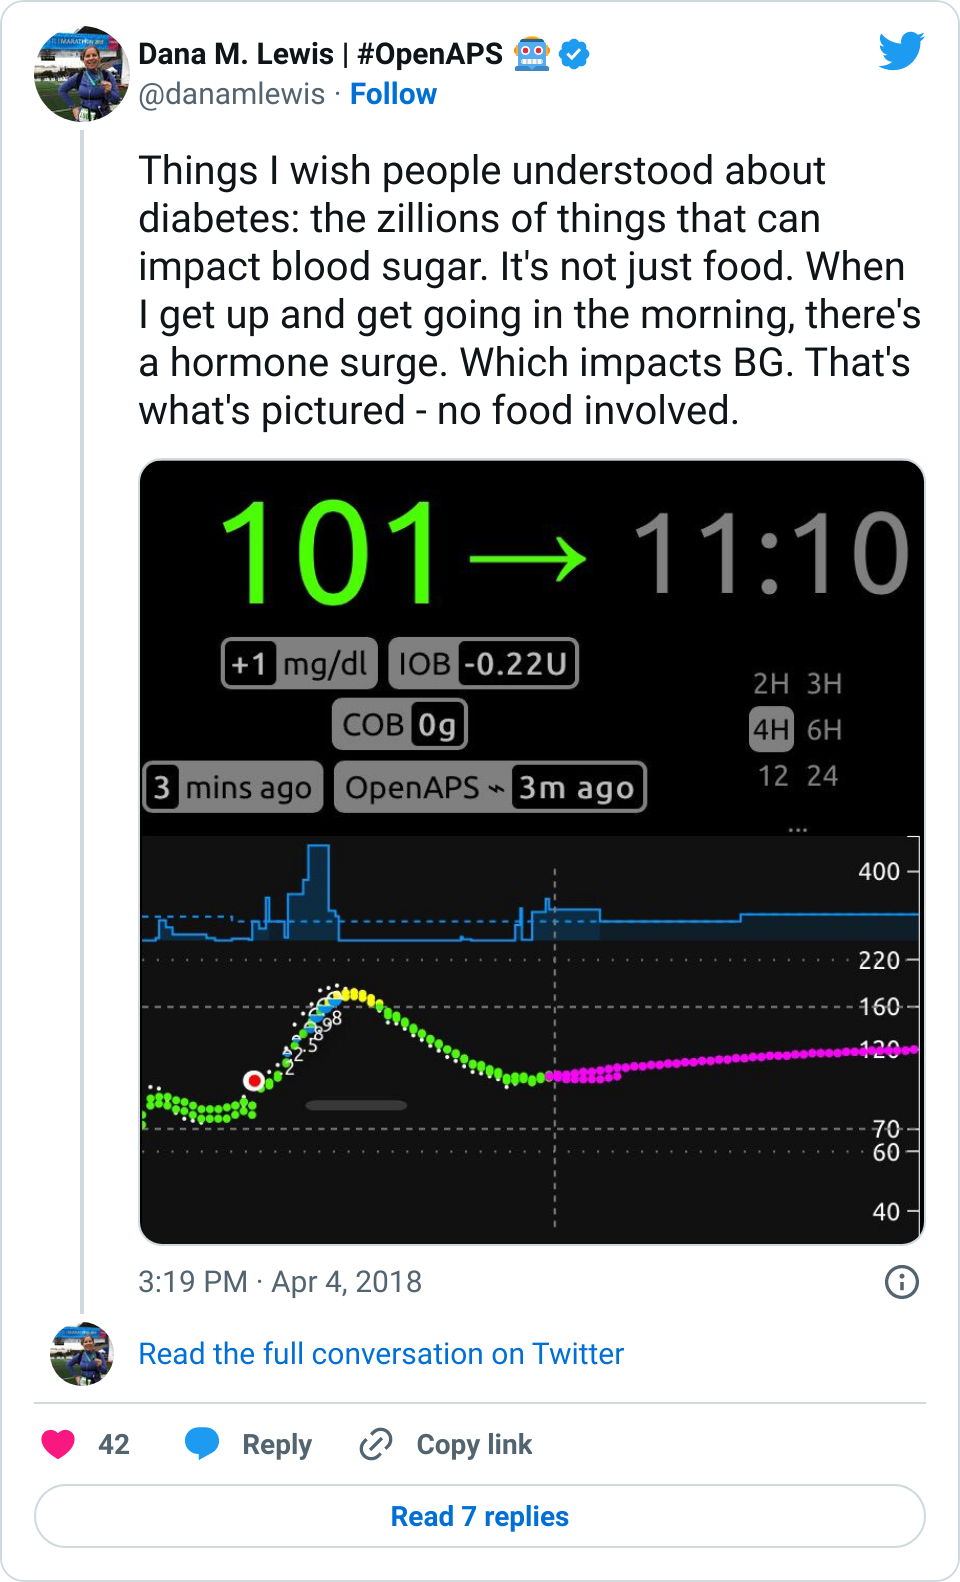 Example of how getting out of bed - rather than dawn phenomenon hormones - can increase BG levels. 